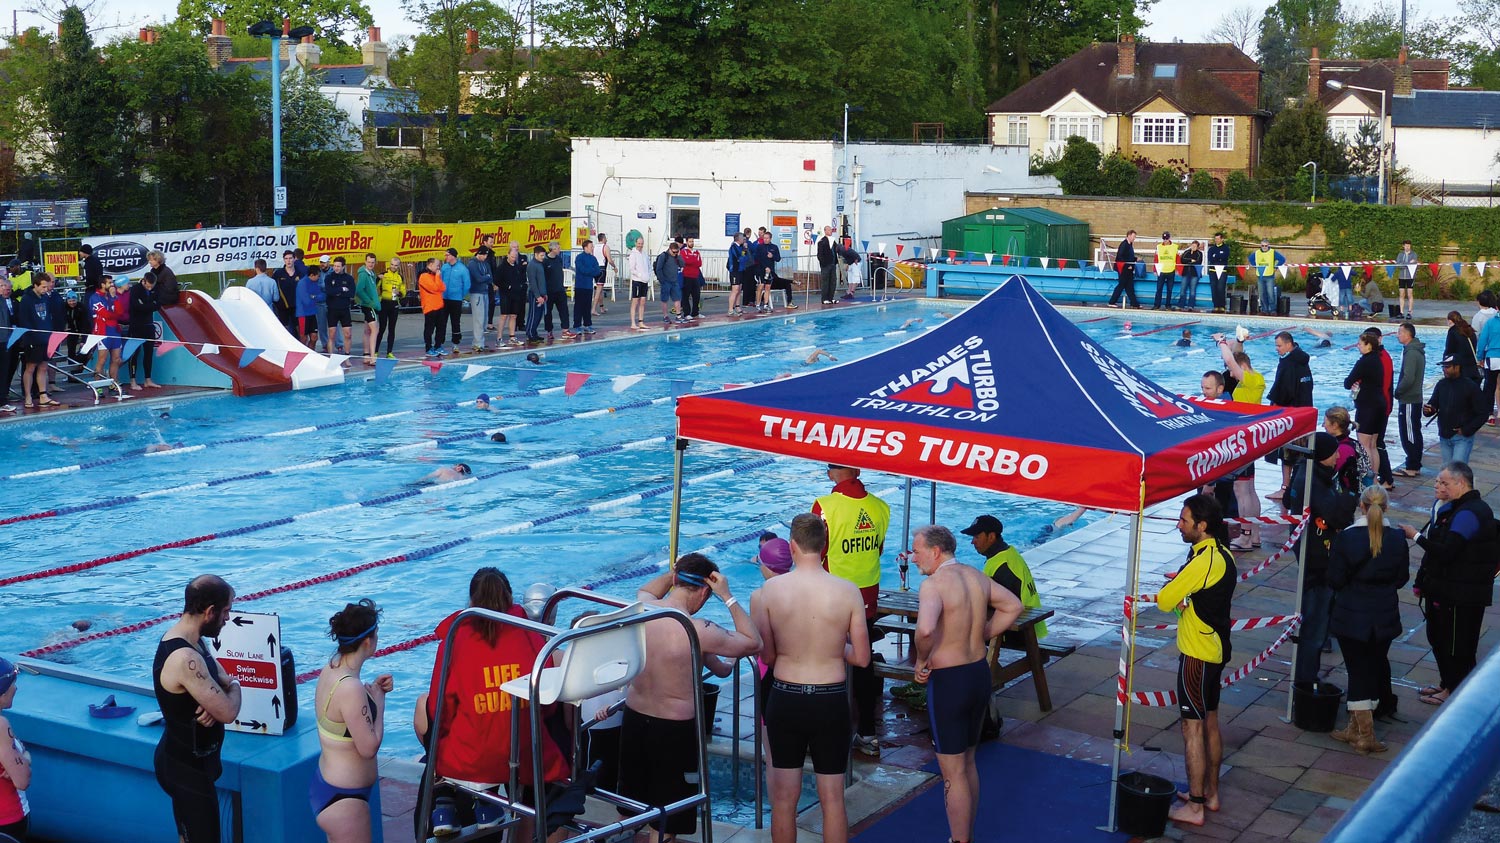 Thames Turbo swimmers